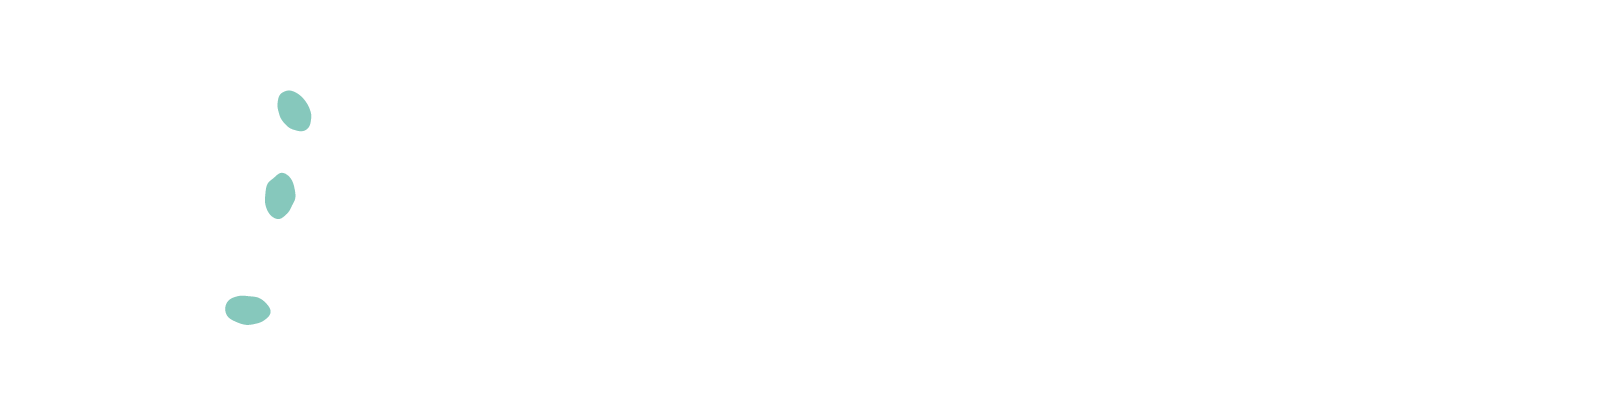 Reserve Care Counselling